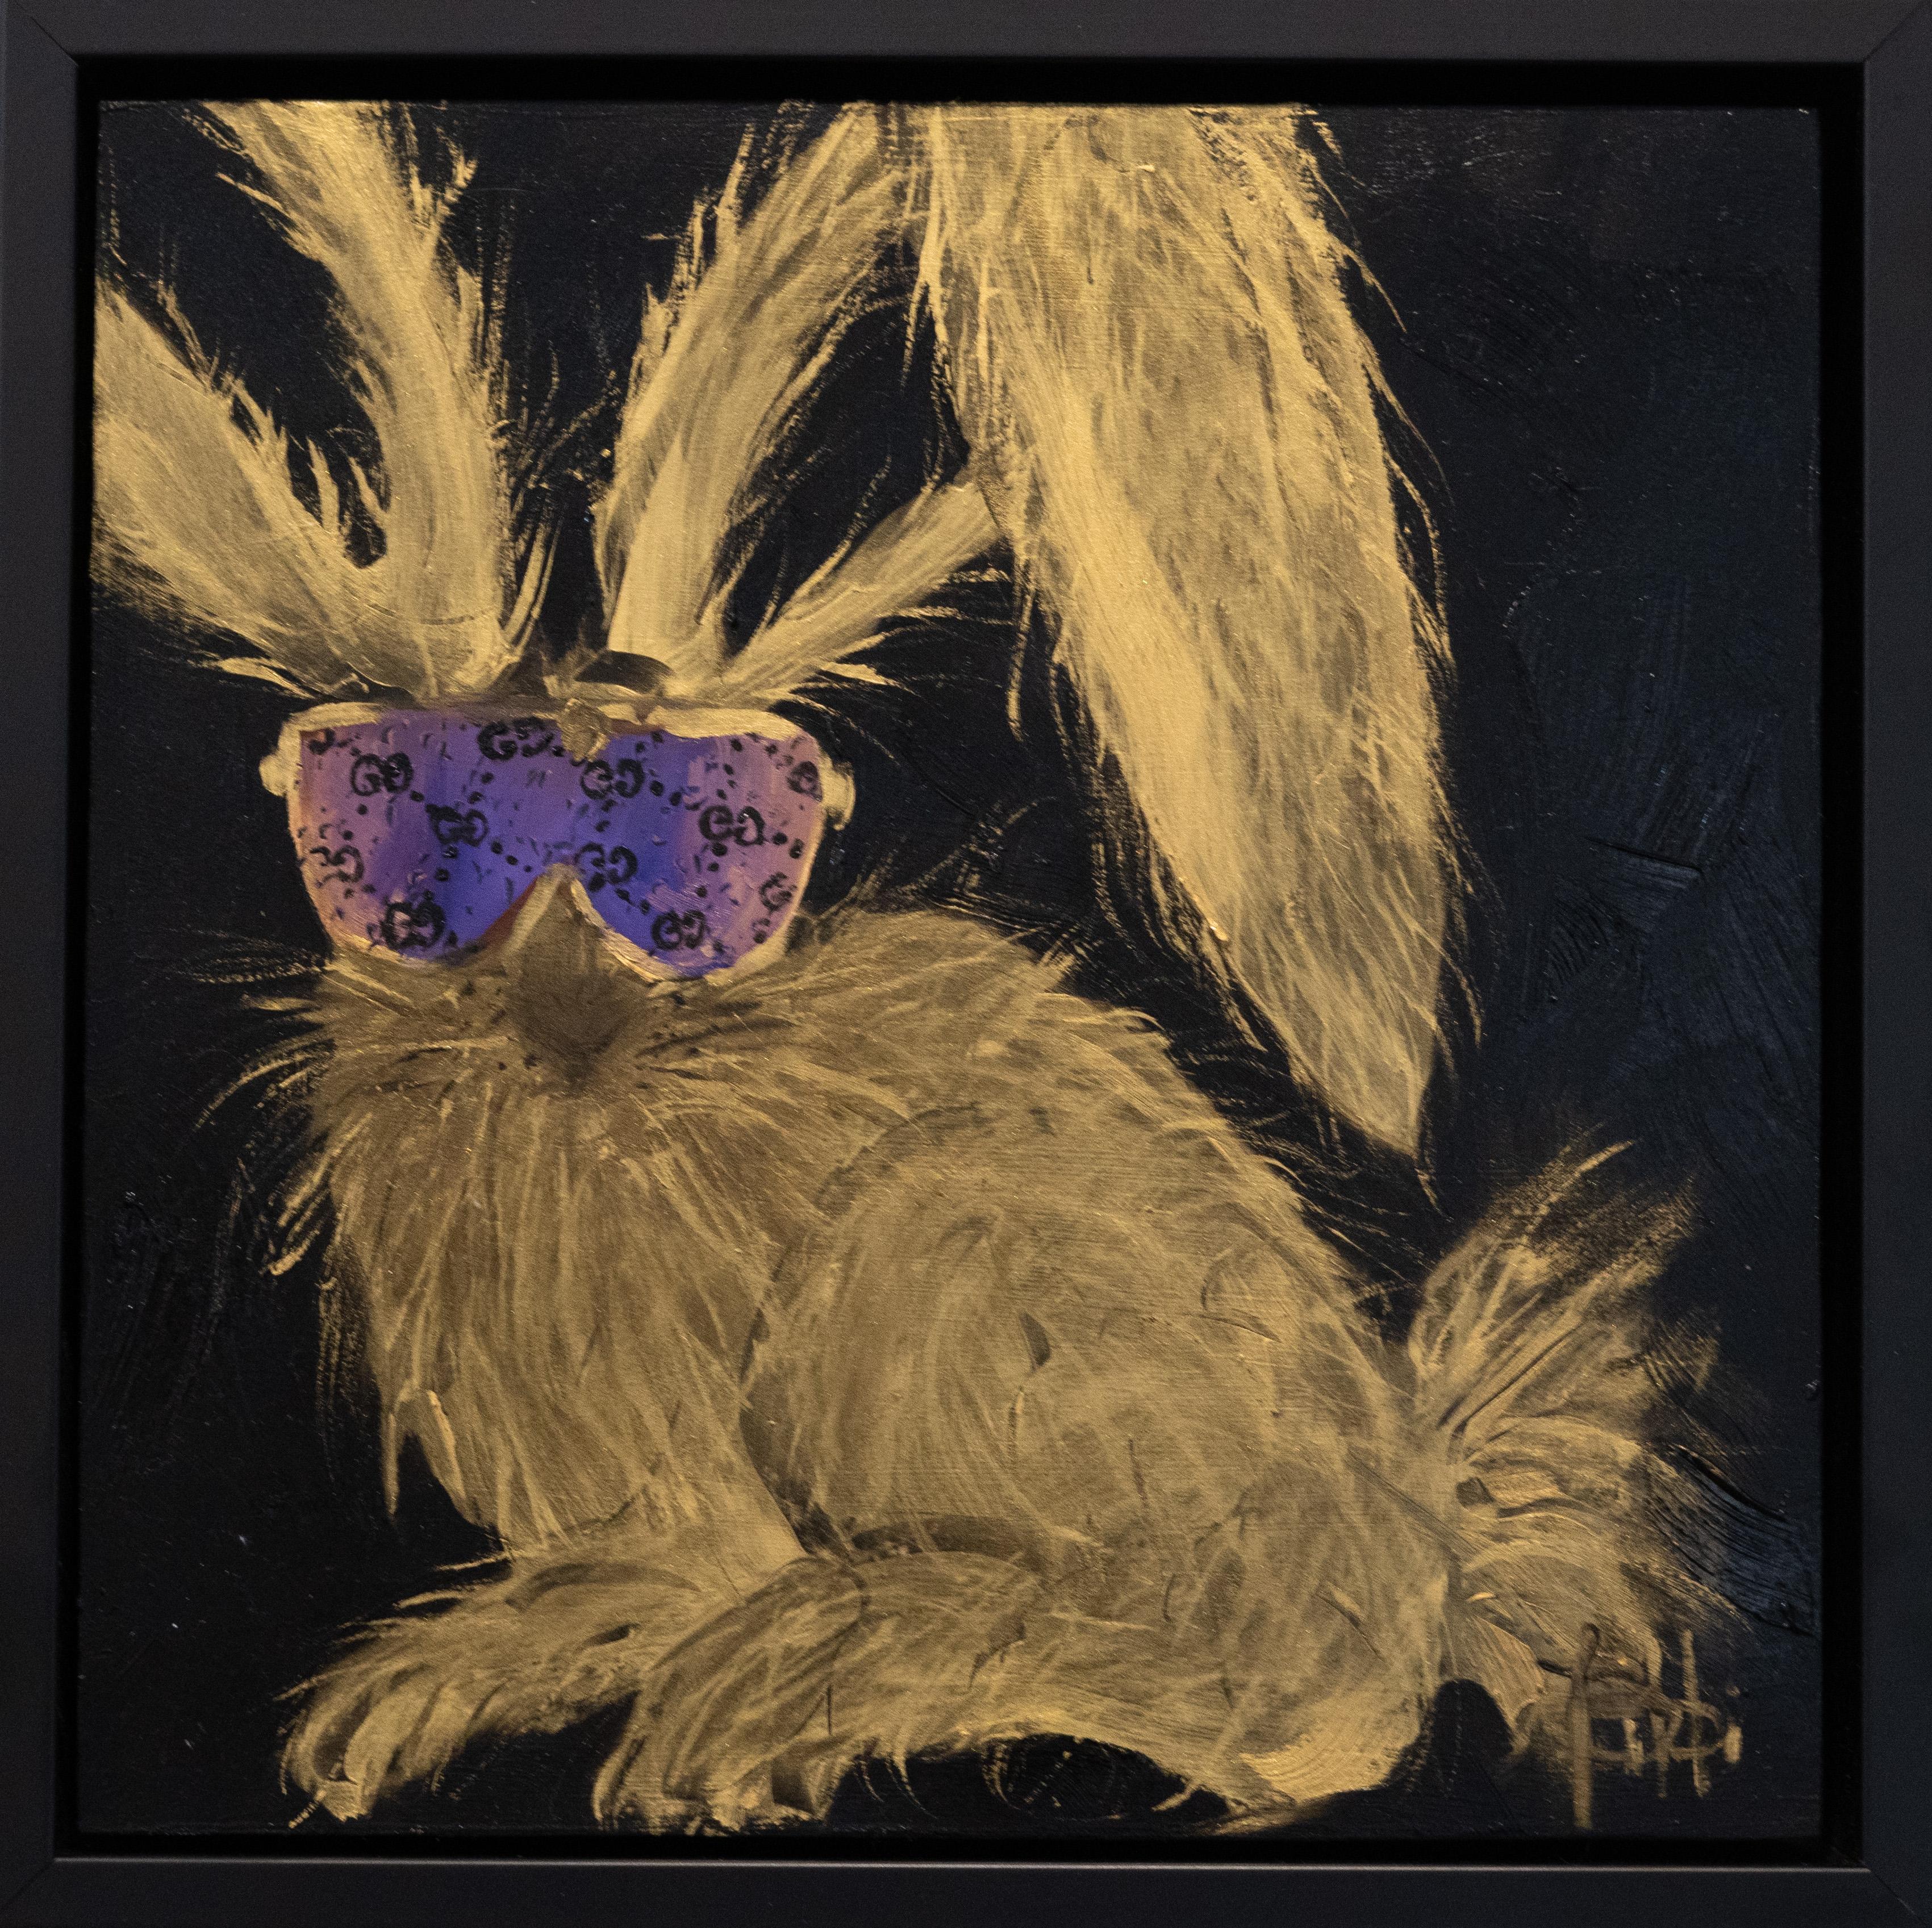 Golden Hare with Louis Vuitton Sunglasses  10x10  Contemporary Art  Framed  5